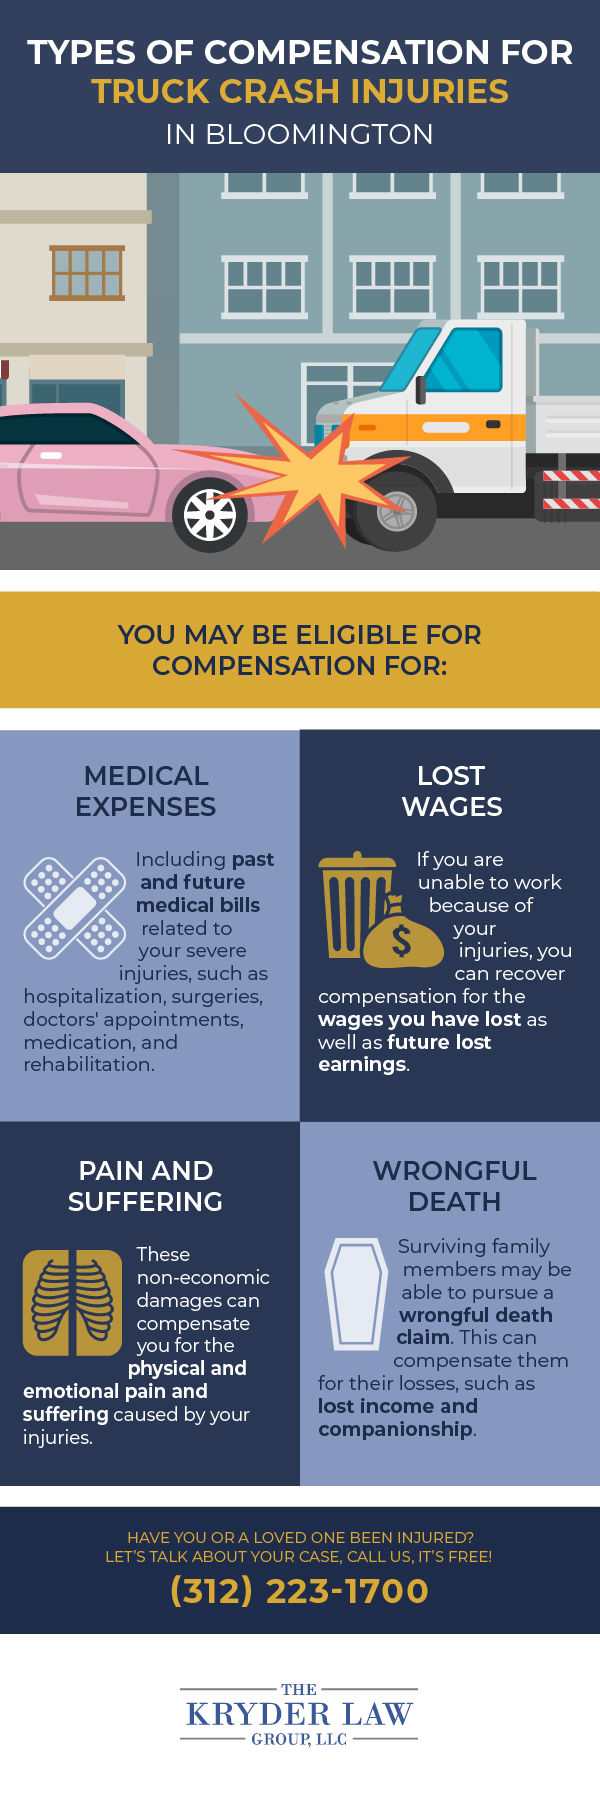 Types of Compensation for Truck Crash Injuries in Bloomington